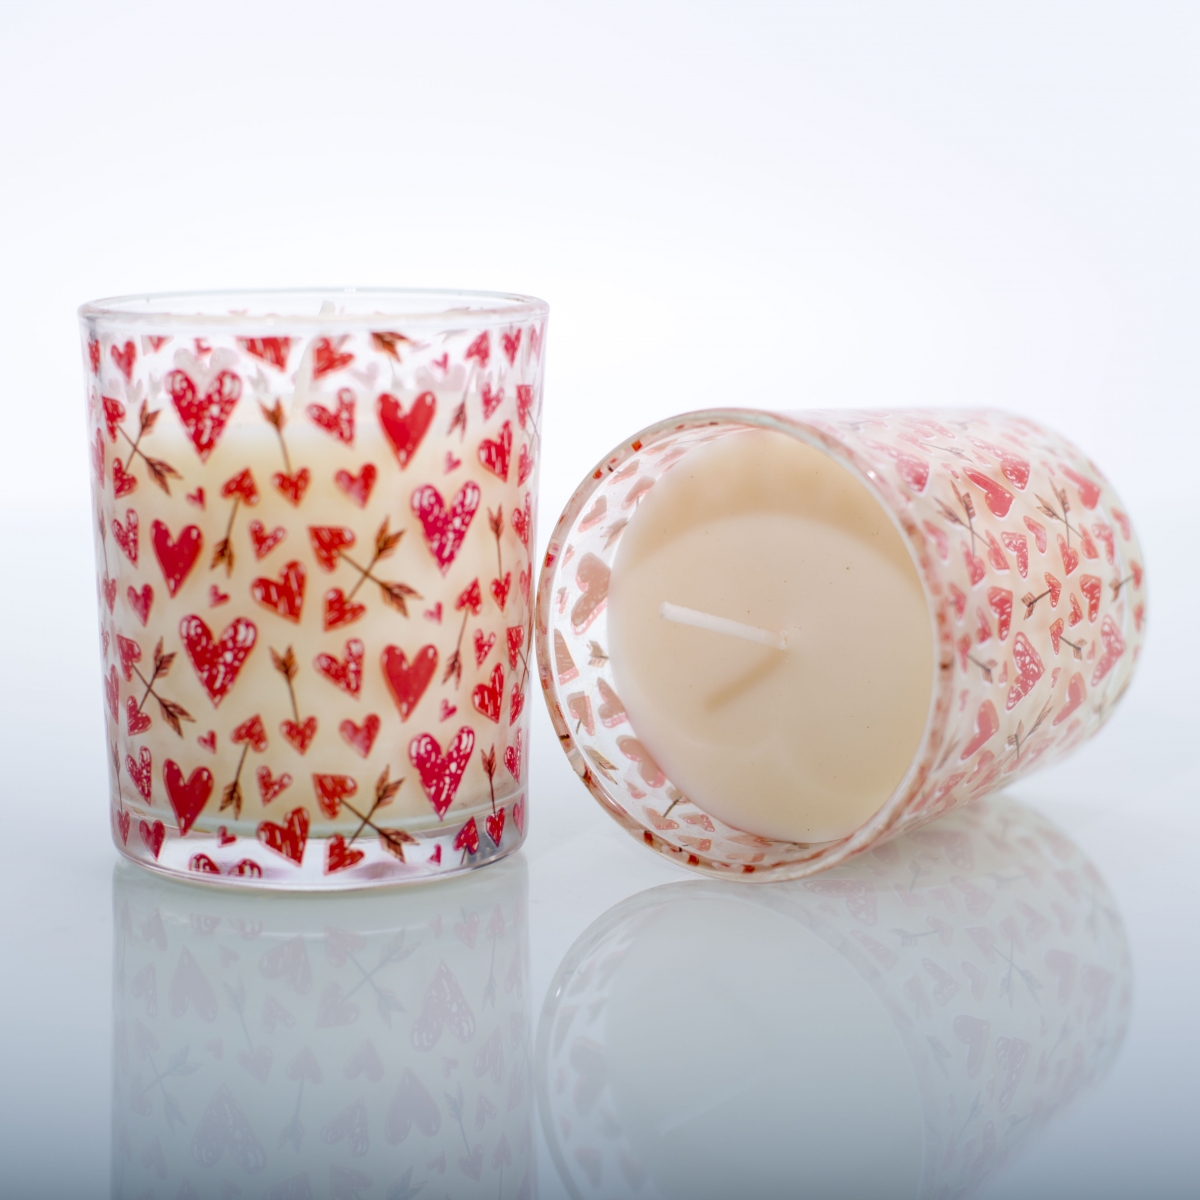 Scented Candles -Heart Decal ,Small Soy Candles ,Valentine Day Candles ,China Factory ,Price-HOWCANDLE-Candles,Scented Candles,Aromatherapy Candles,Soy Candles,Vegan Candles,Jar Candles,Pillar Candles,Candle Gift Sets,Essential Oils,Reed Diffuser,Candle Holder,